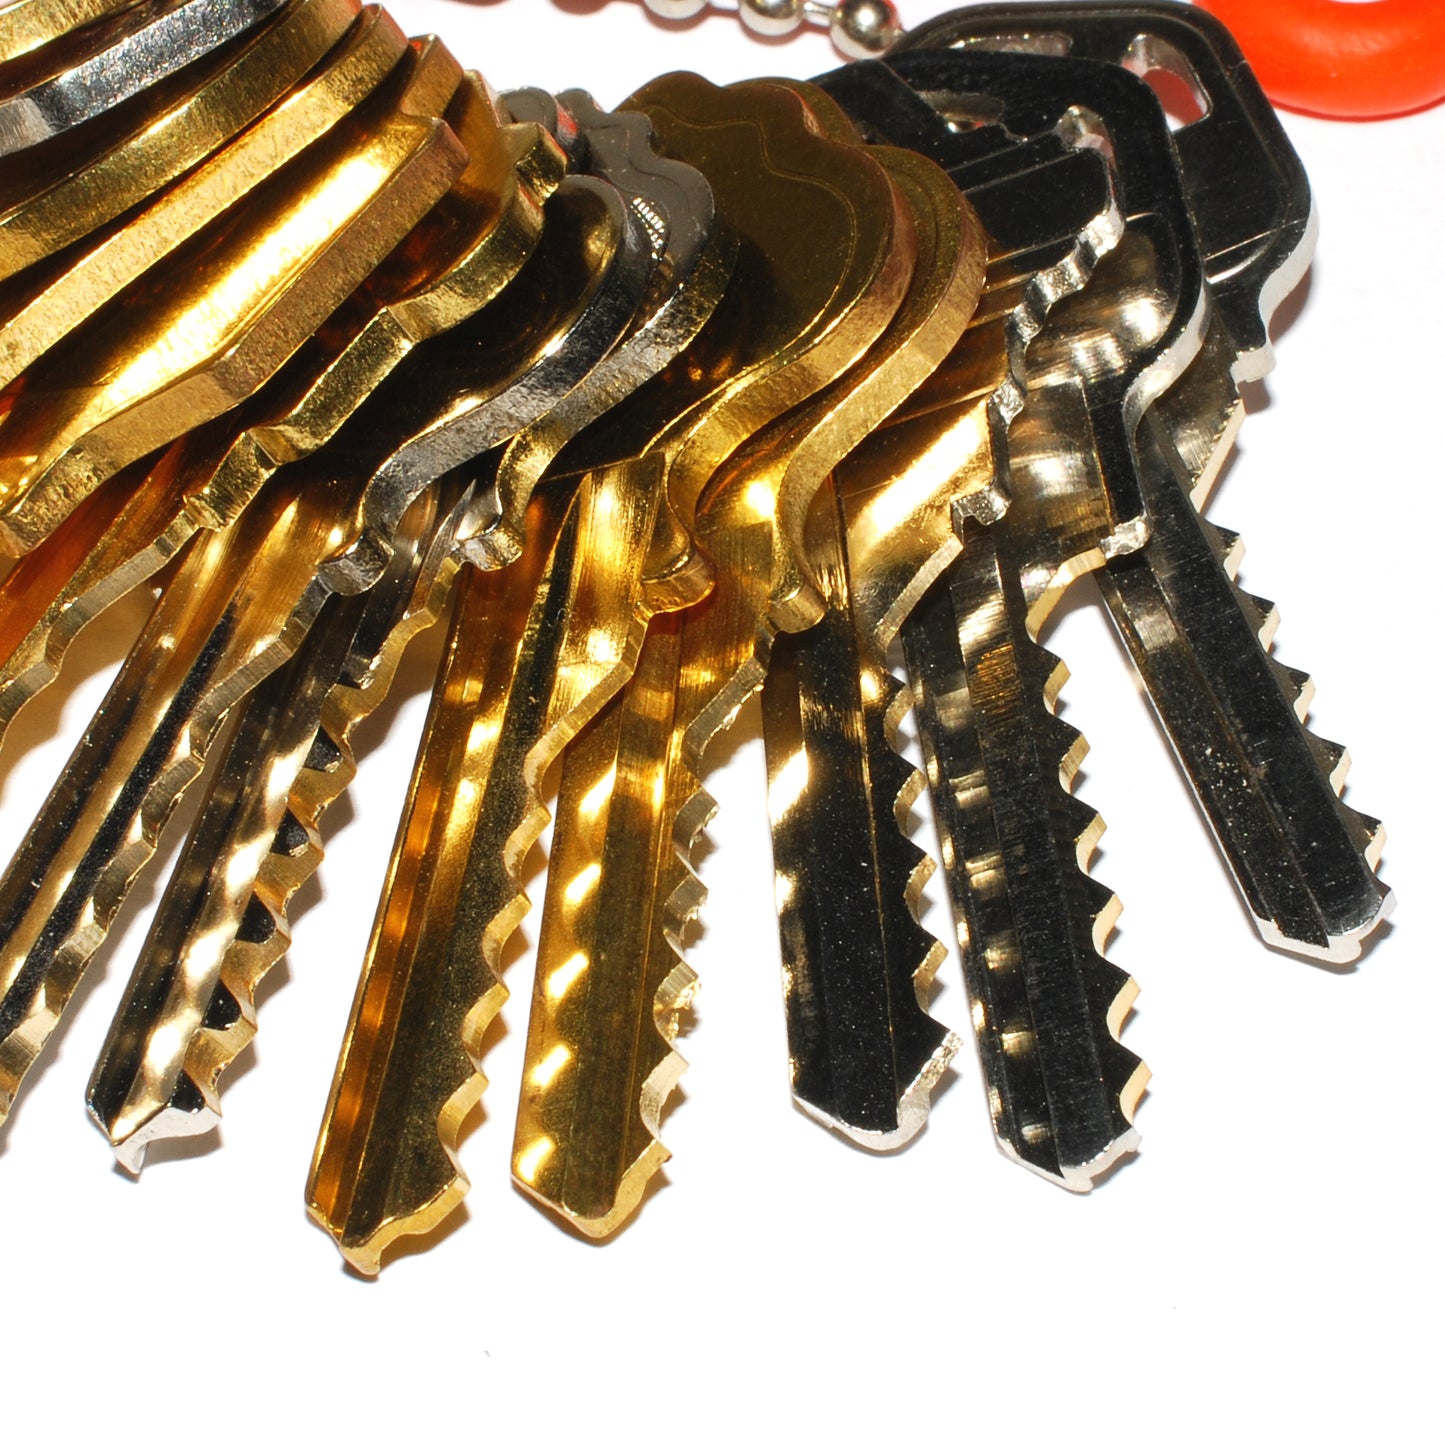 16 Residential Bump Key Collection Set